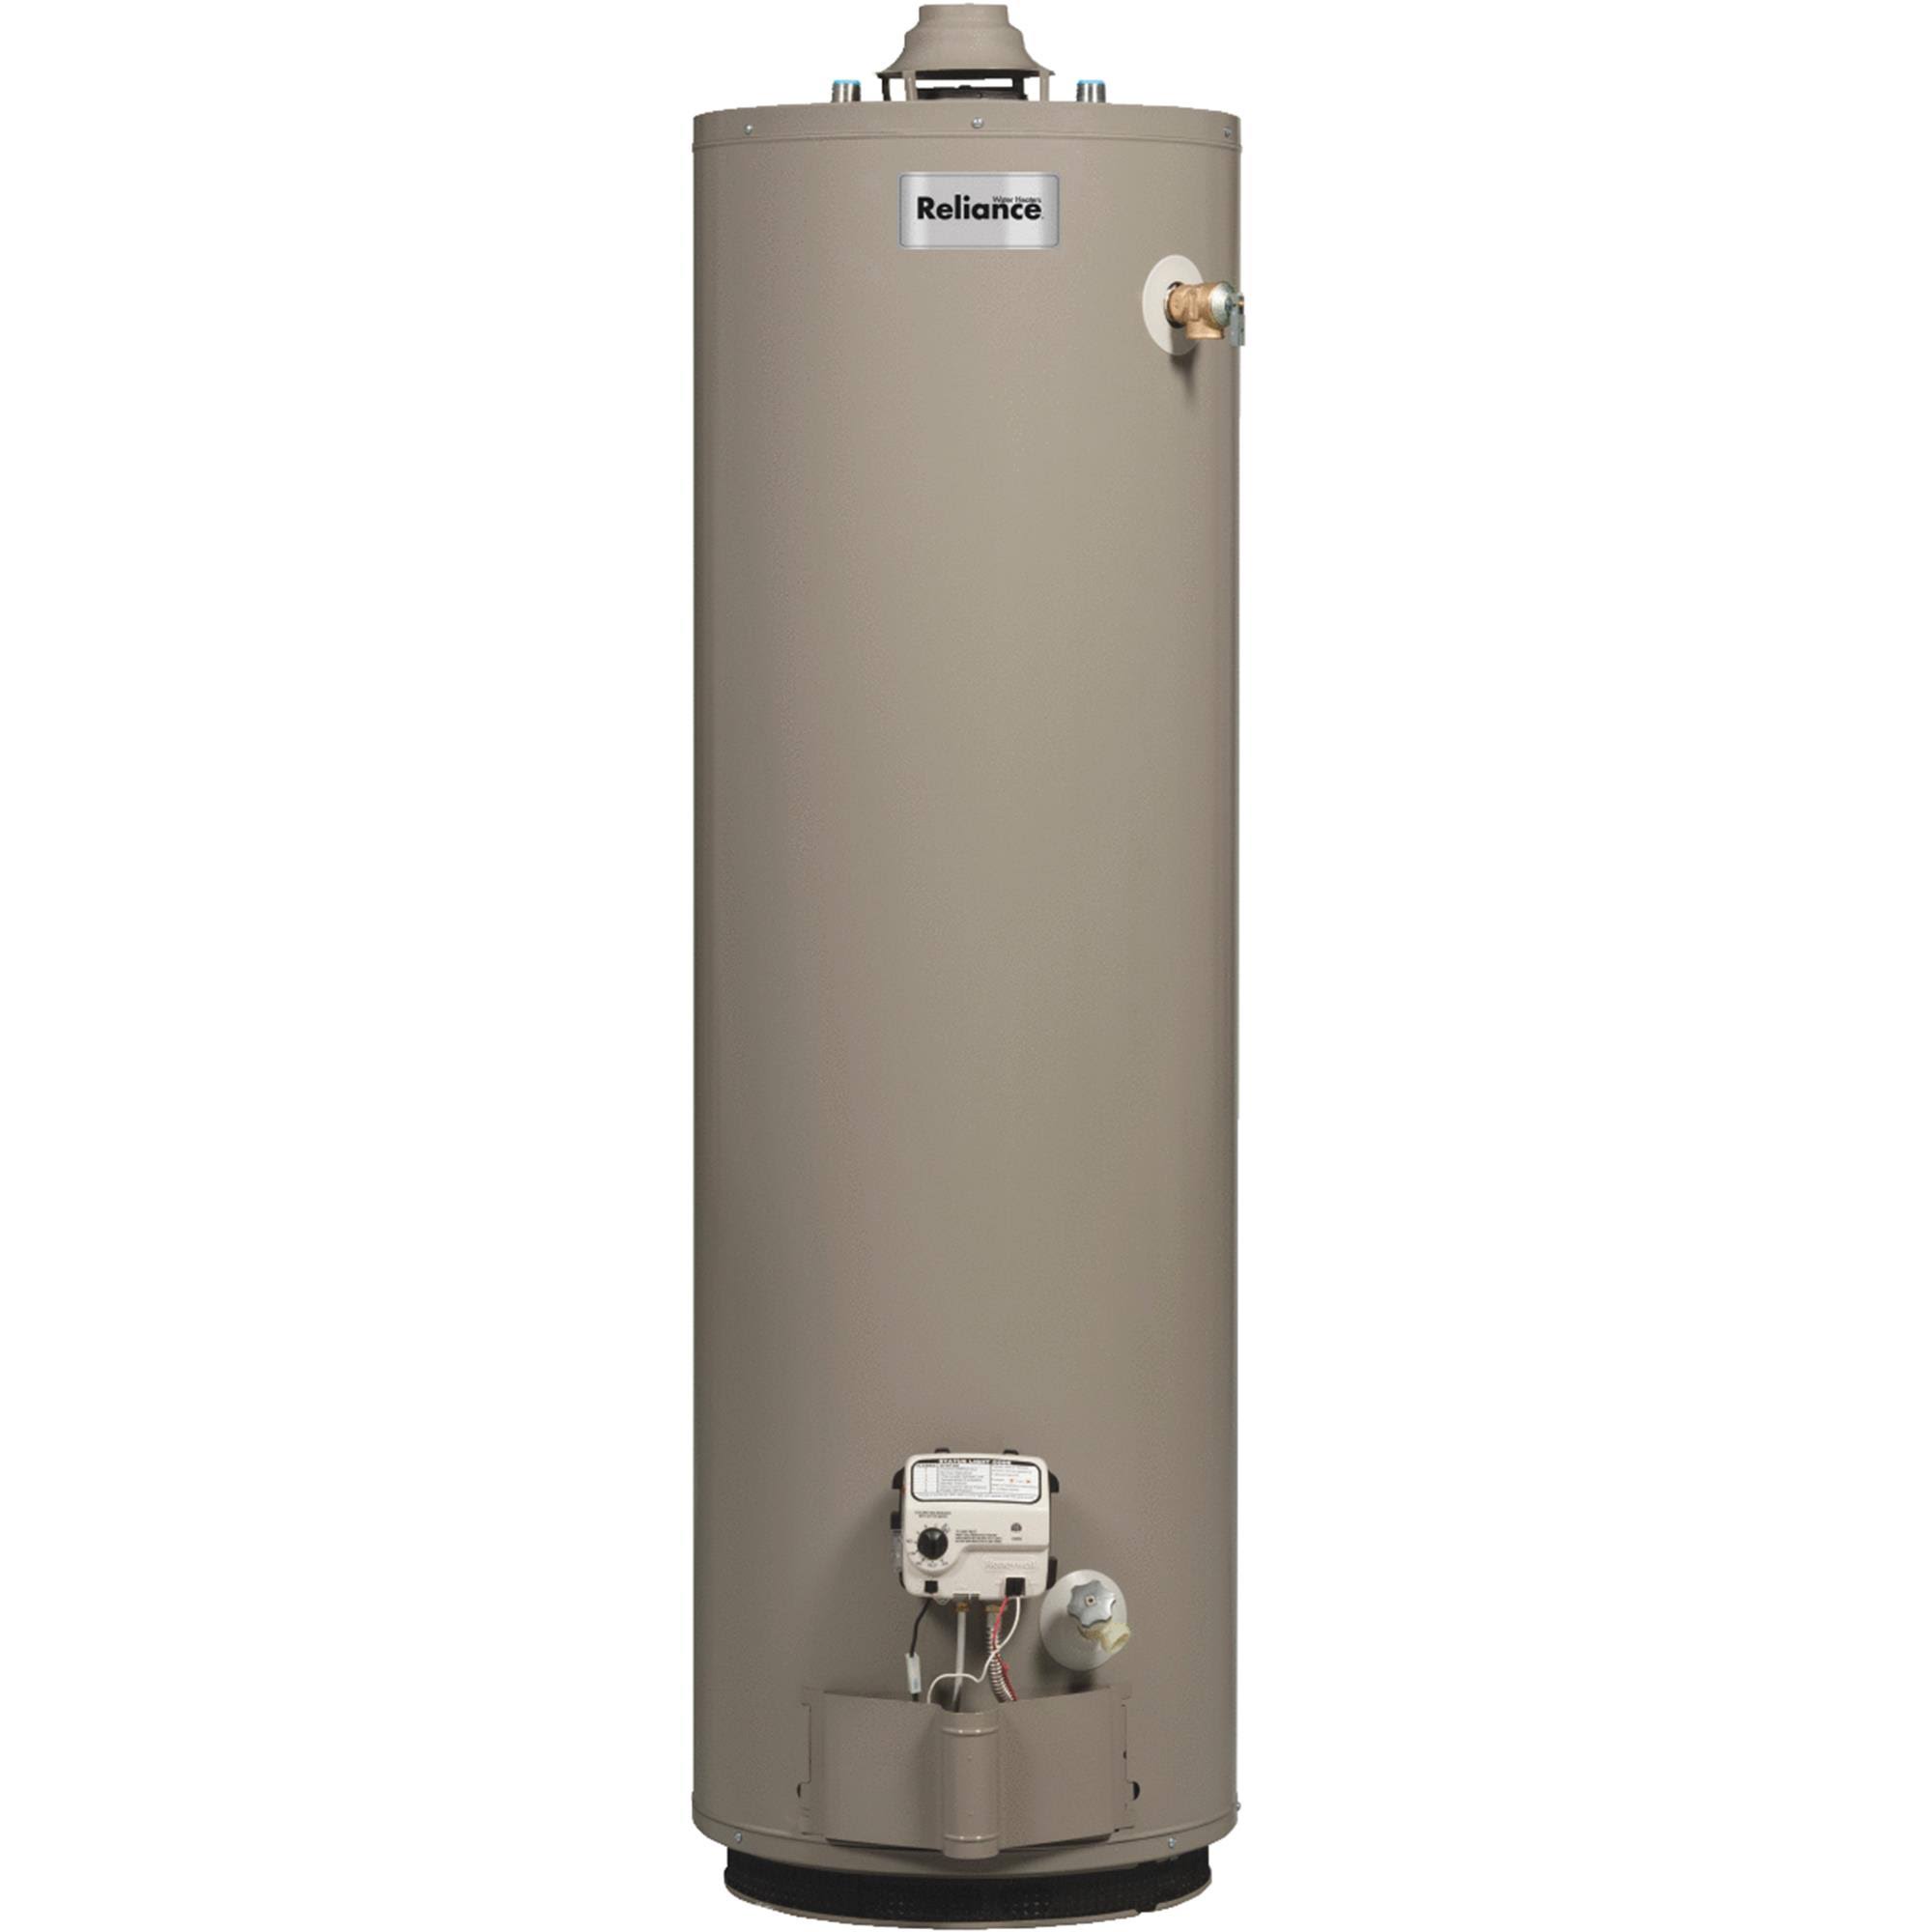 Reliance Tall Natural Gas Water Heater - 50gal